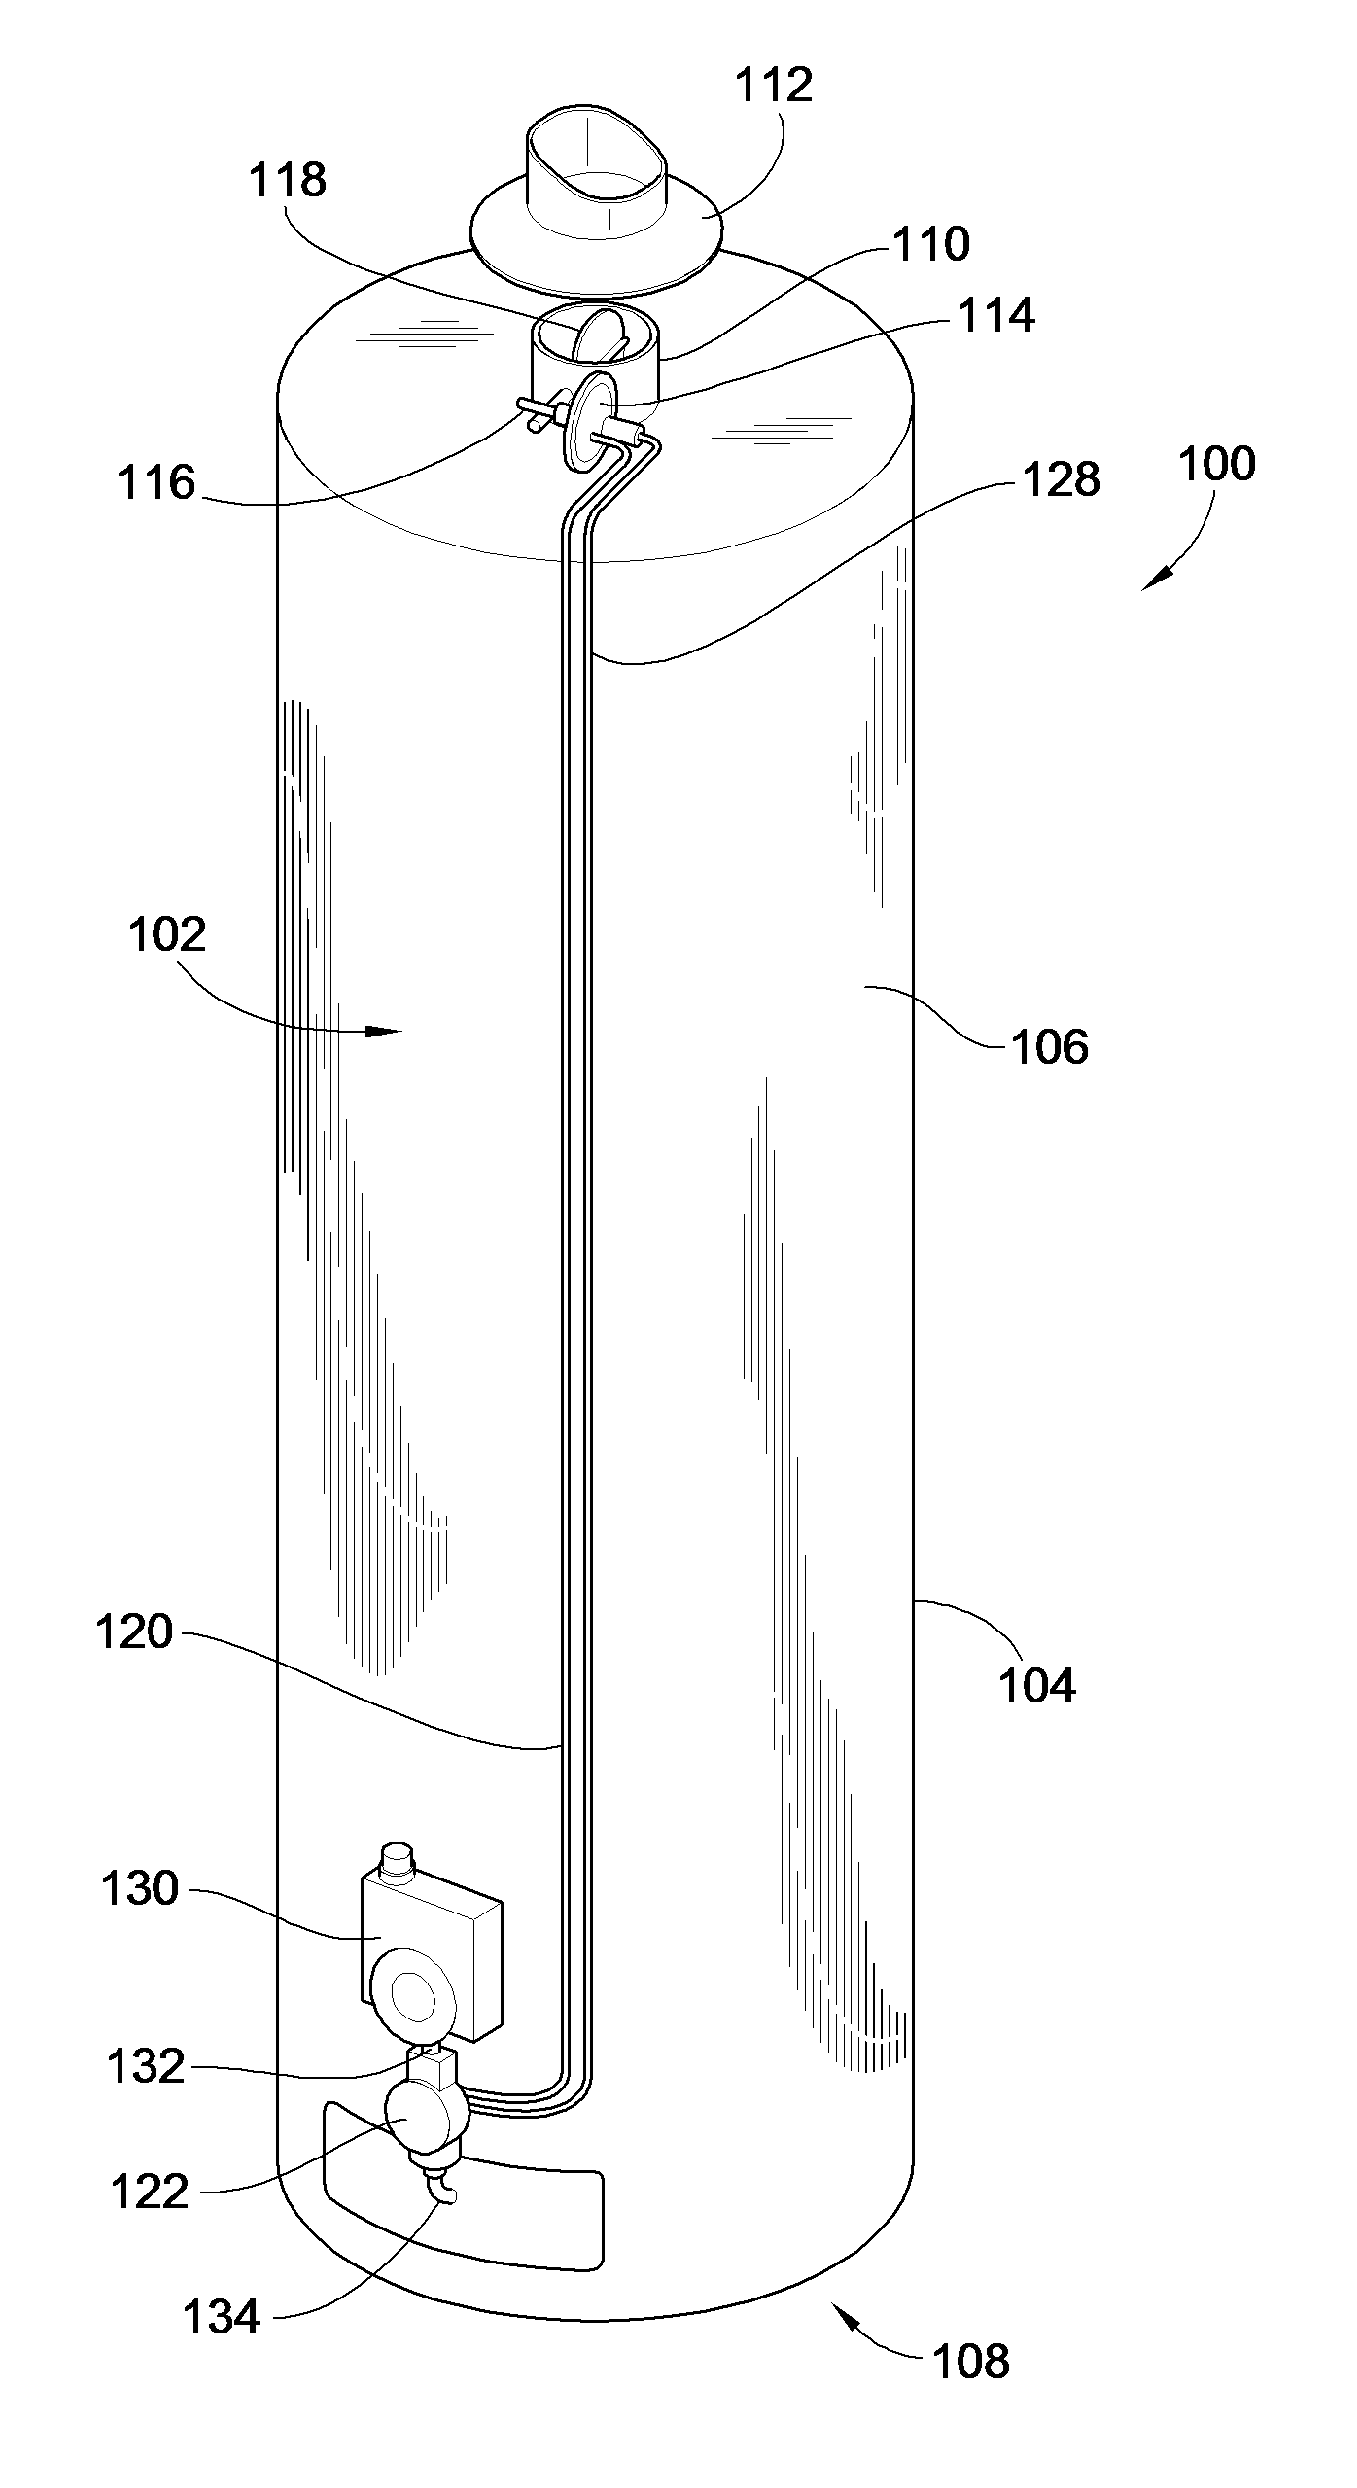 System and Method to Reduce Standby Energy Loss in a Gas Burning Appliance